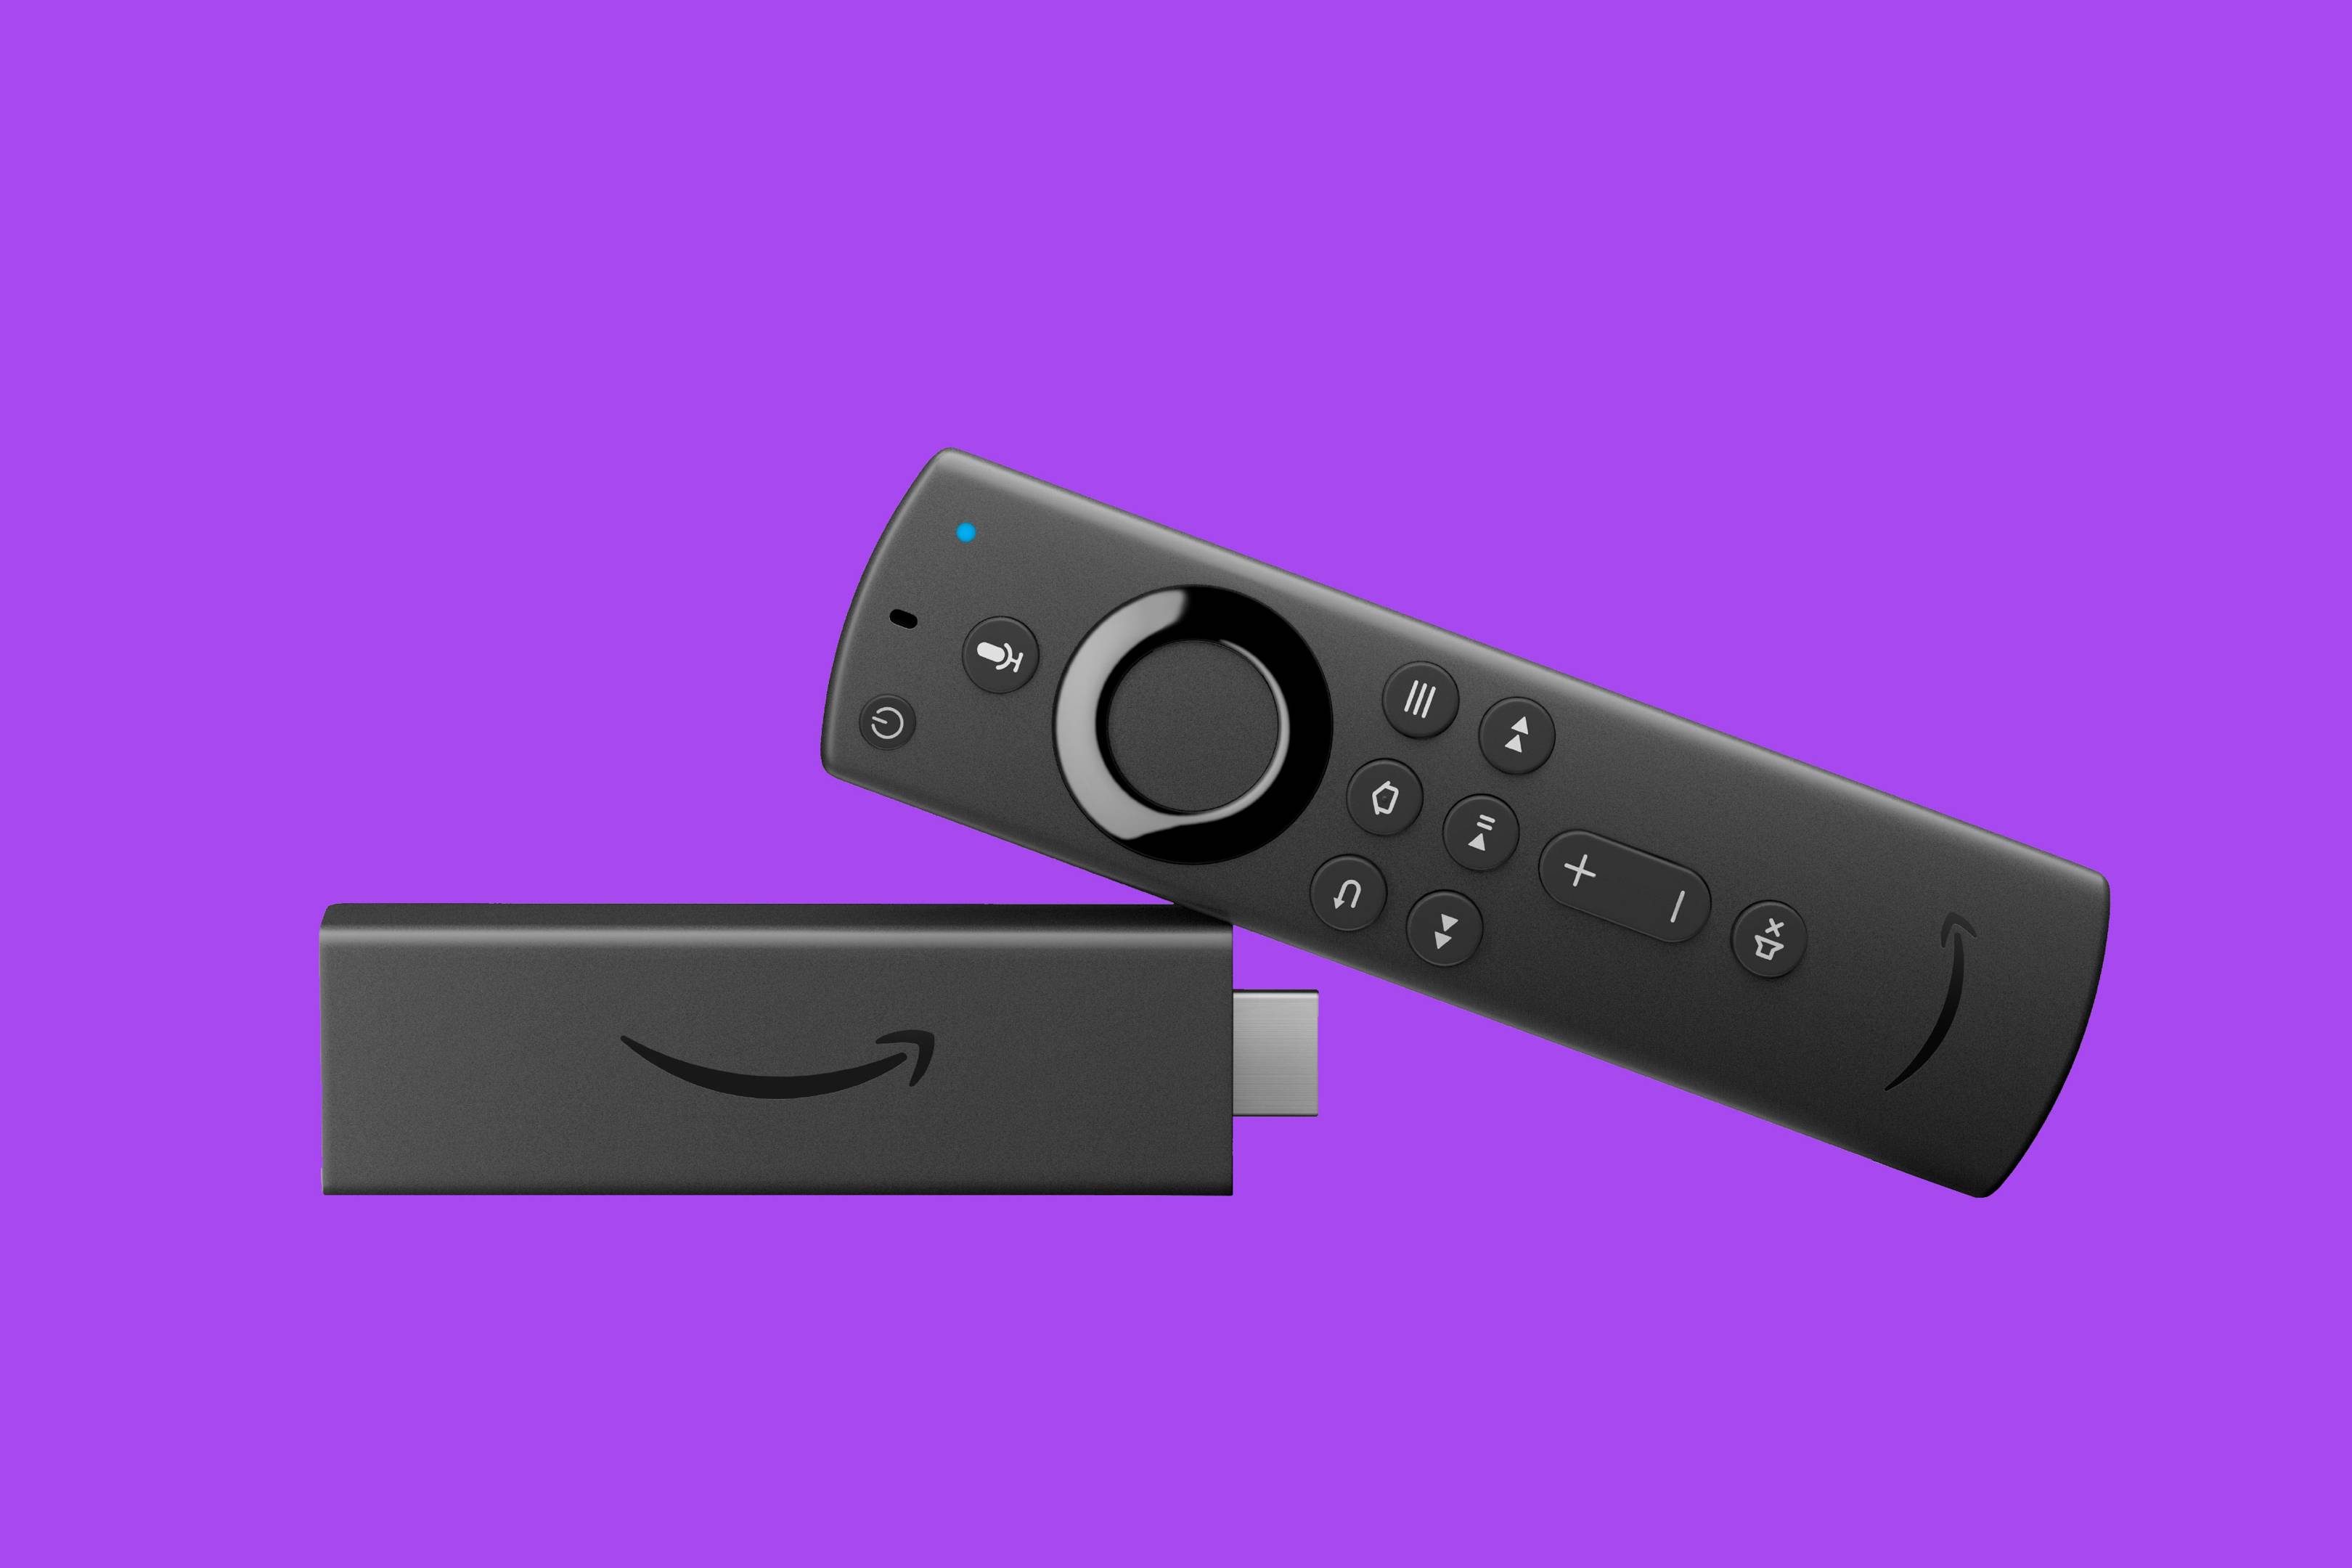 best buy outlet store have new amazon fire tv 4k